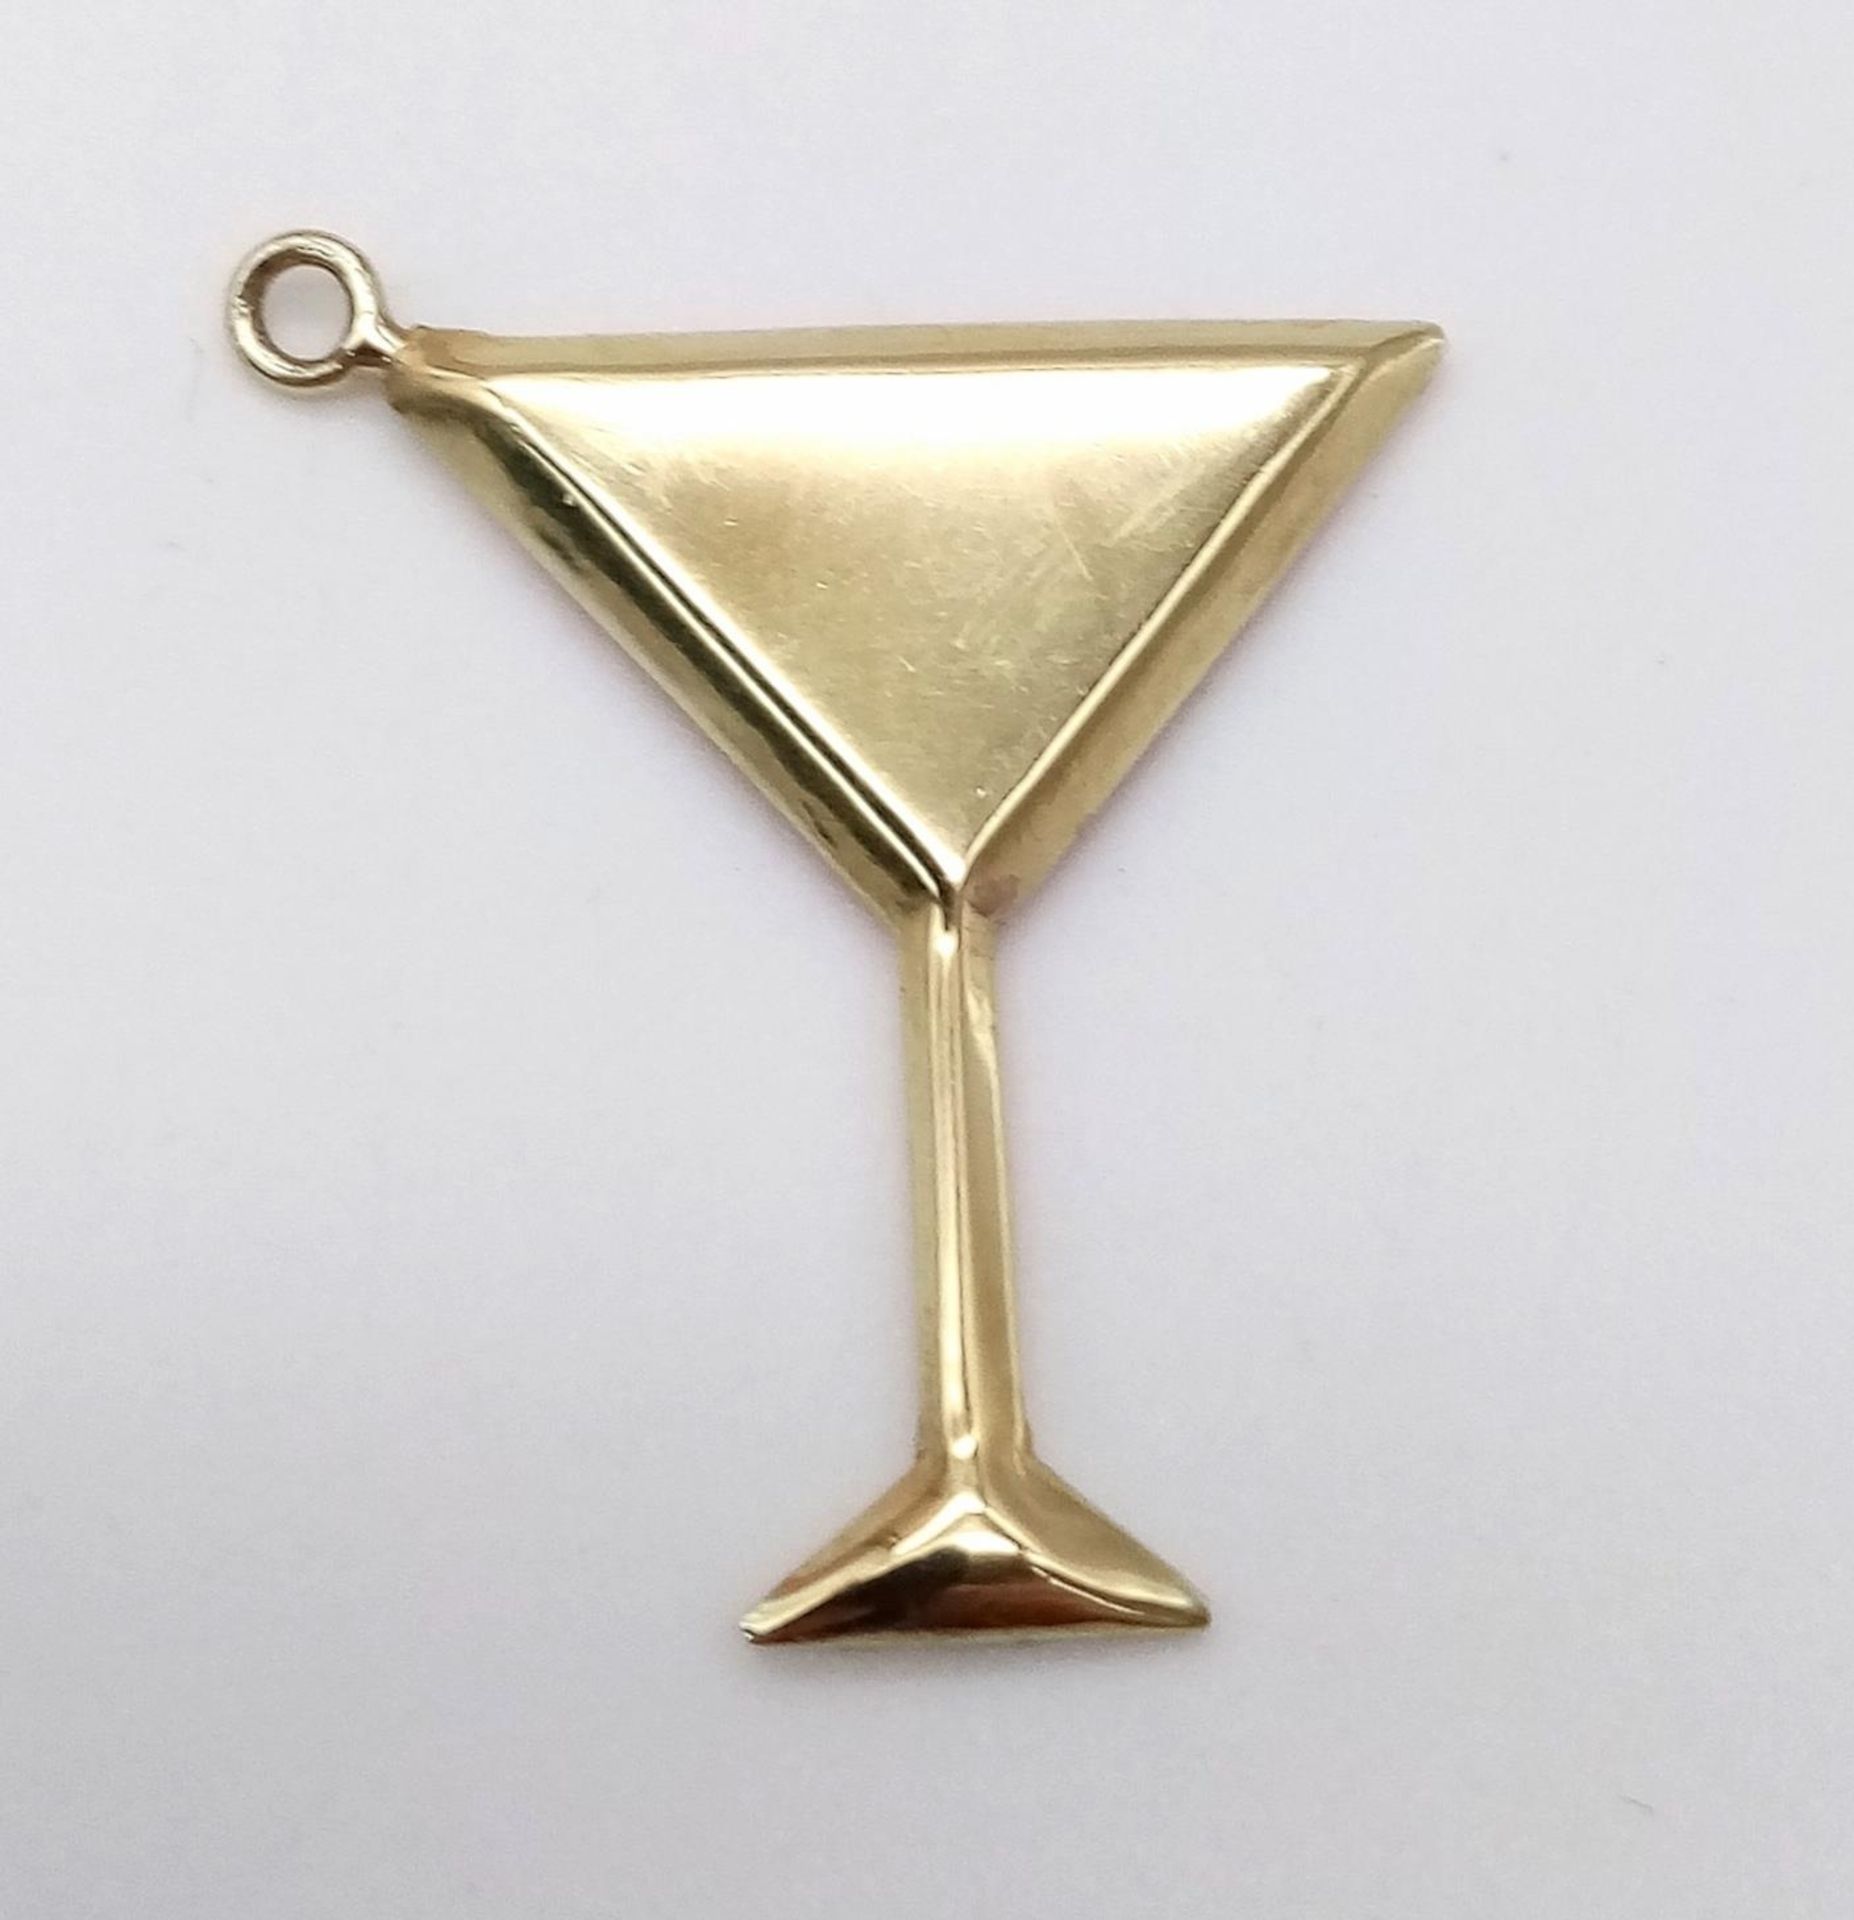 A 9K GOLD STONE SET COCKTAIL GLASS CHARM/PENDANT . .4gms - Image 2 of 3